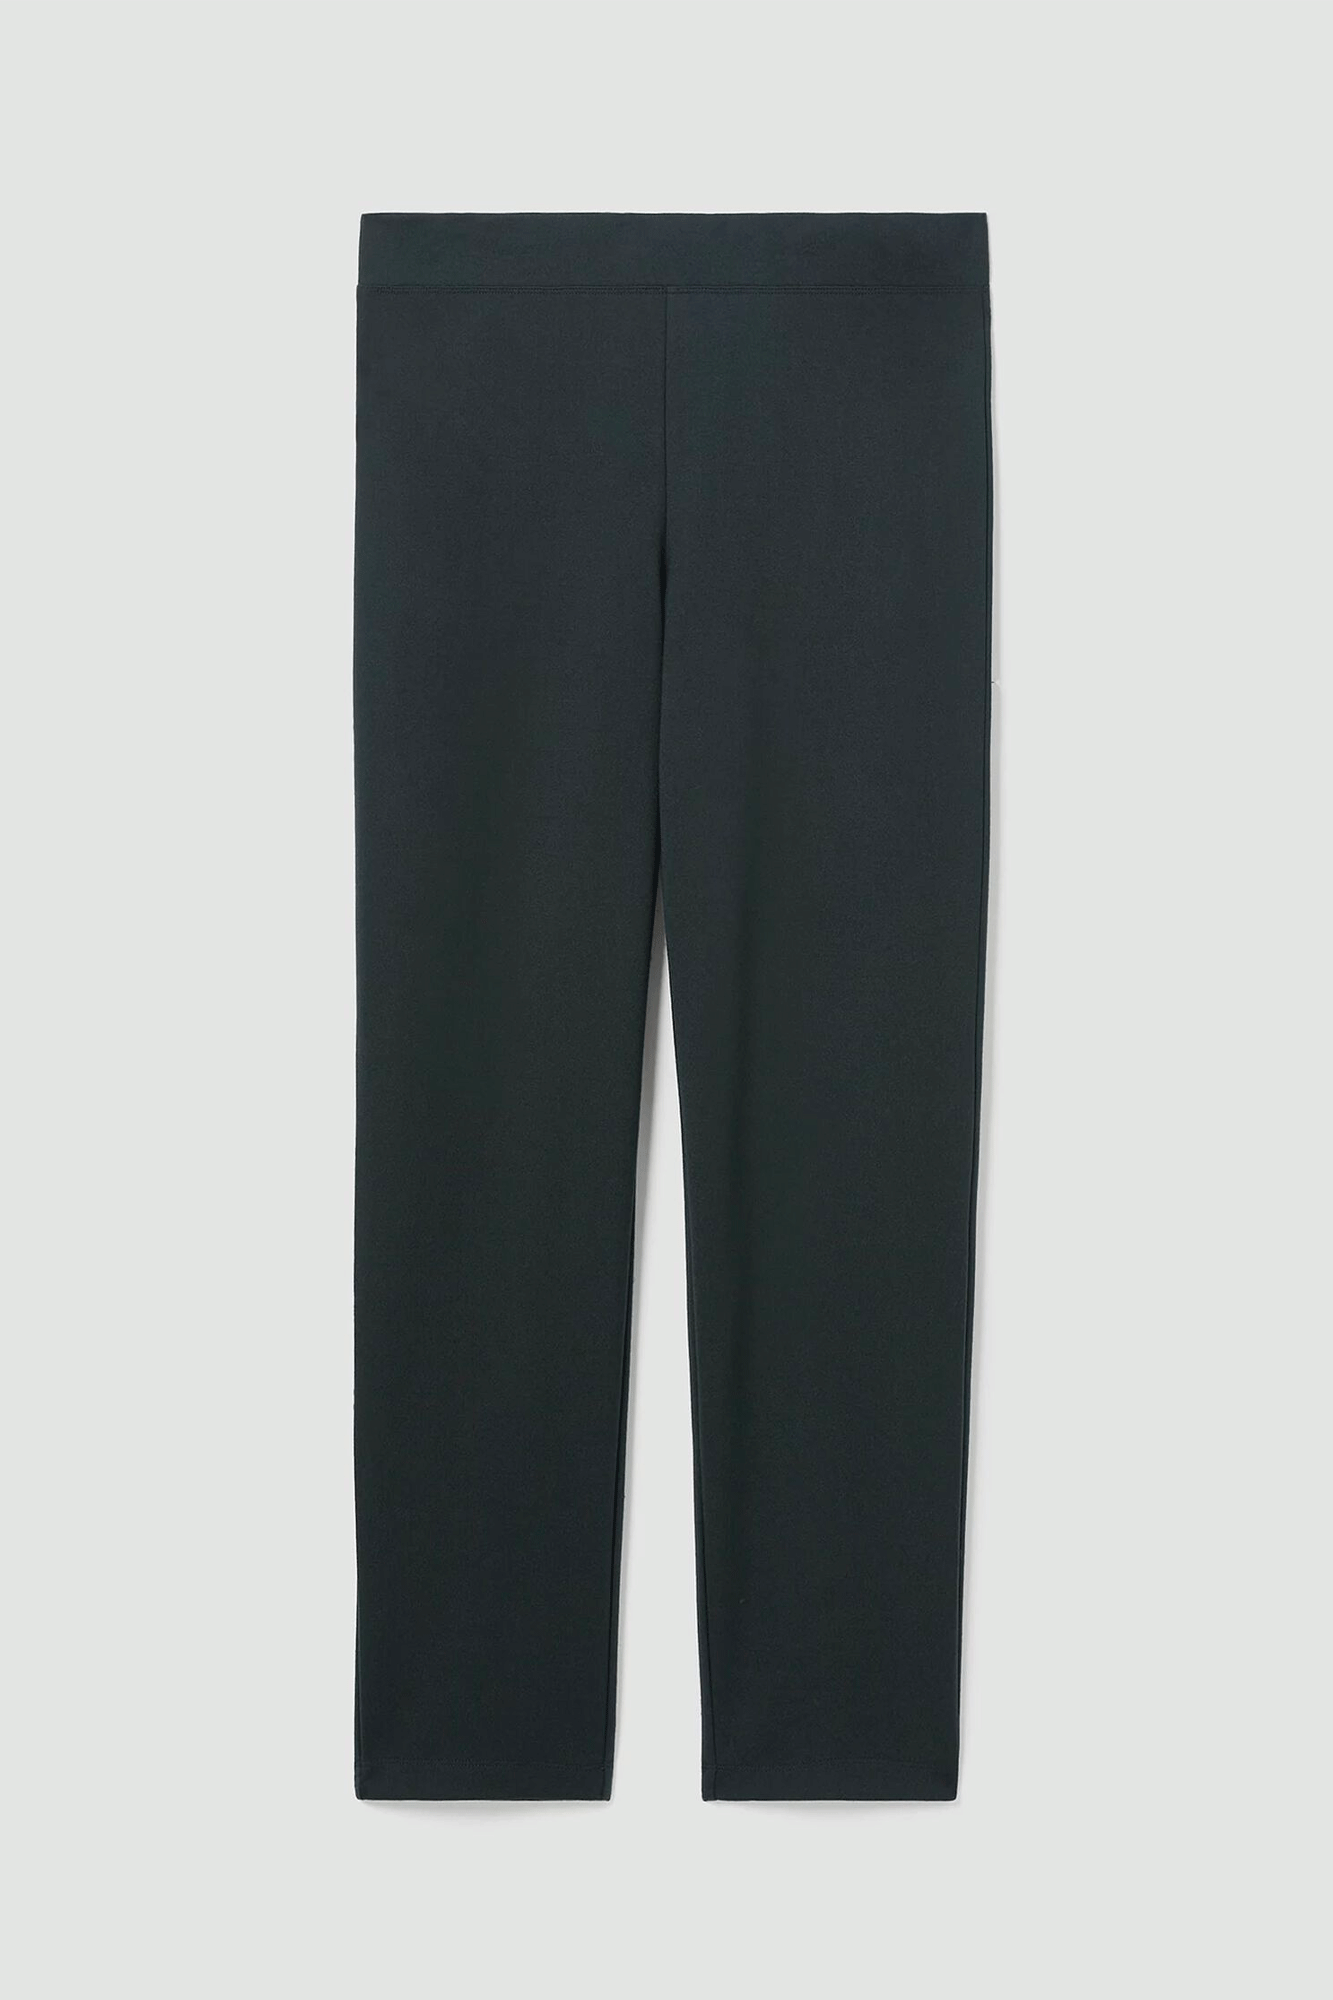 The Slim Ankle Pant from Eileen Fisher is a structured and streamlined wardrobe staple crafted from stretch ponte with Tencel™ Lyocell for durability and comfort. Its slim fit and easy-care fabric make for effortless layering and easy laundering.